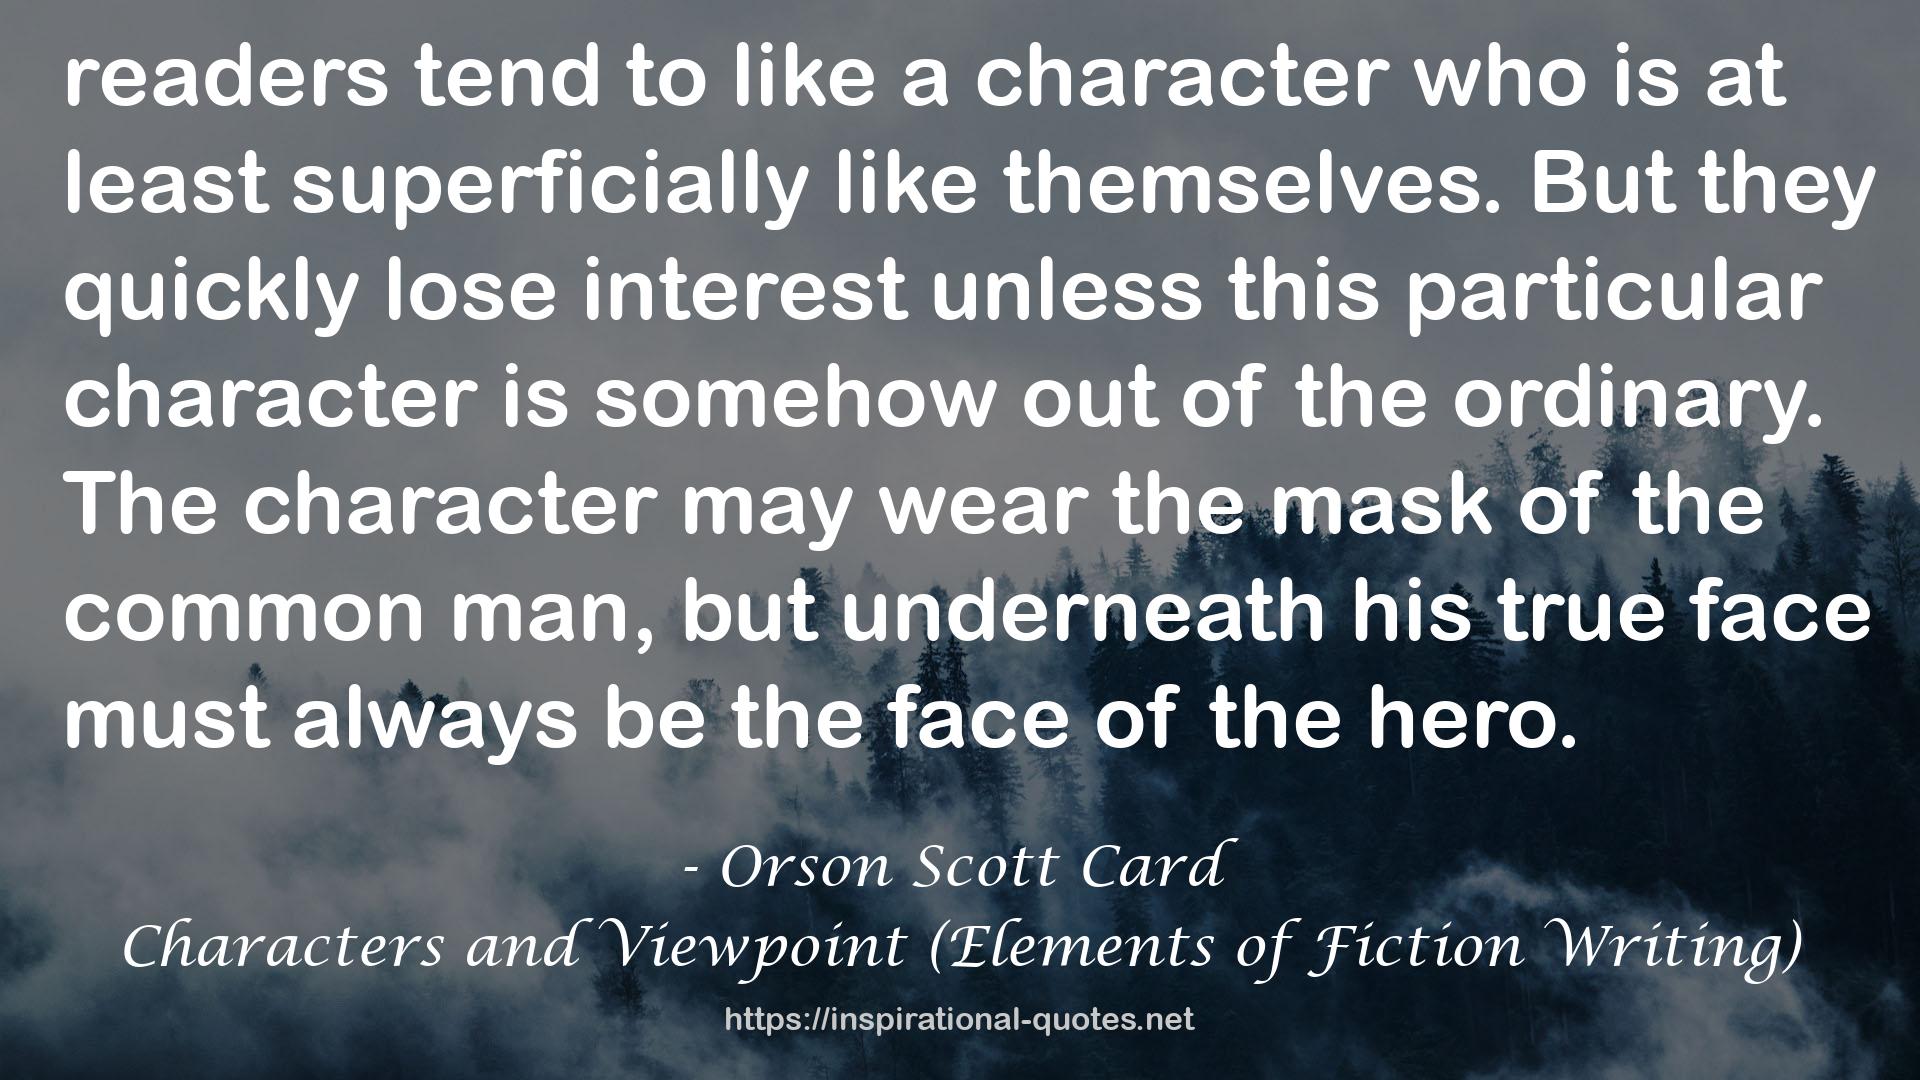 Characters and Viewpoint (Elements of Fiction Writing) QUOTES